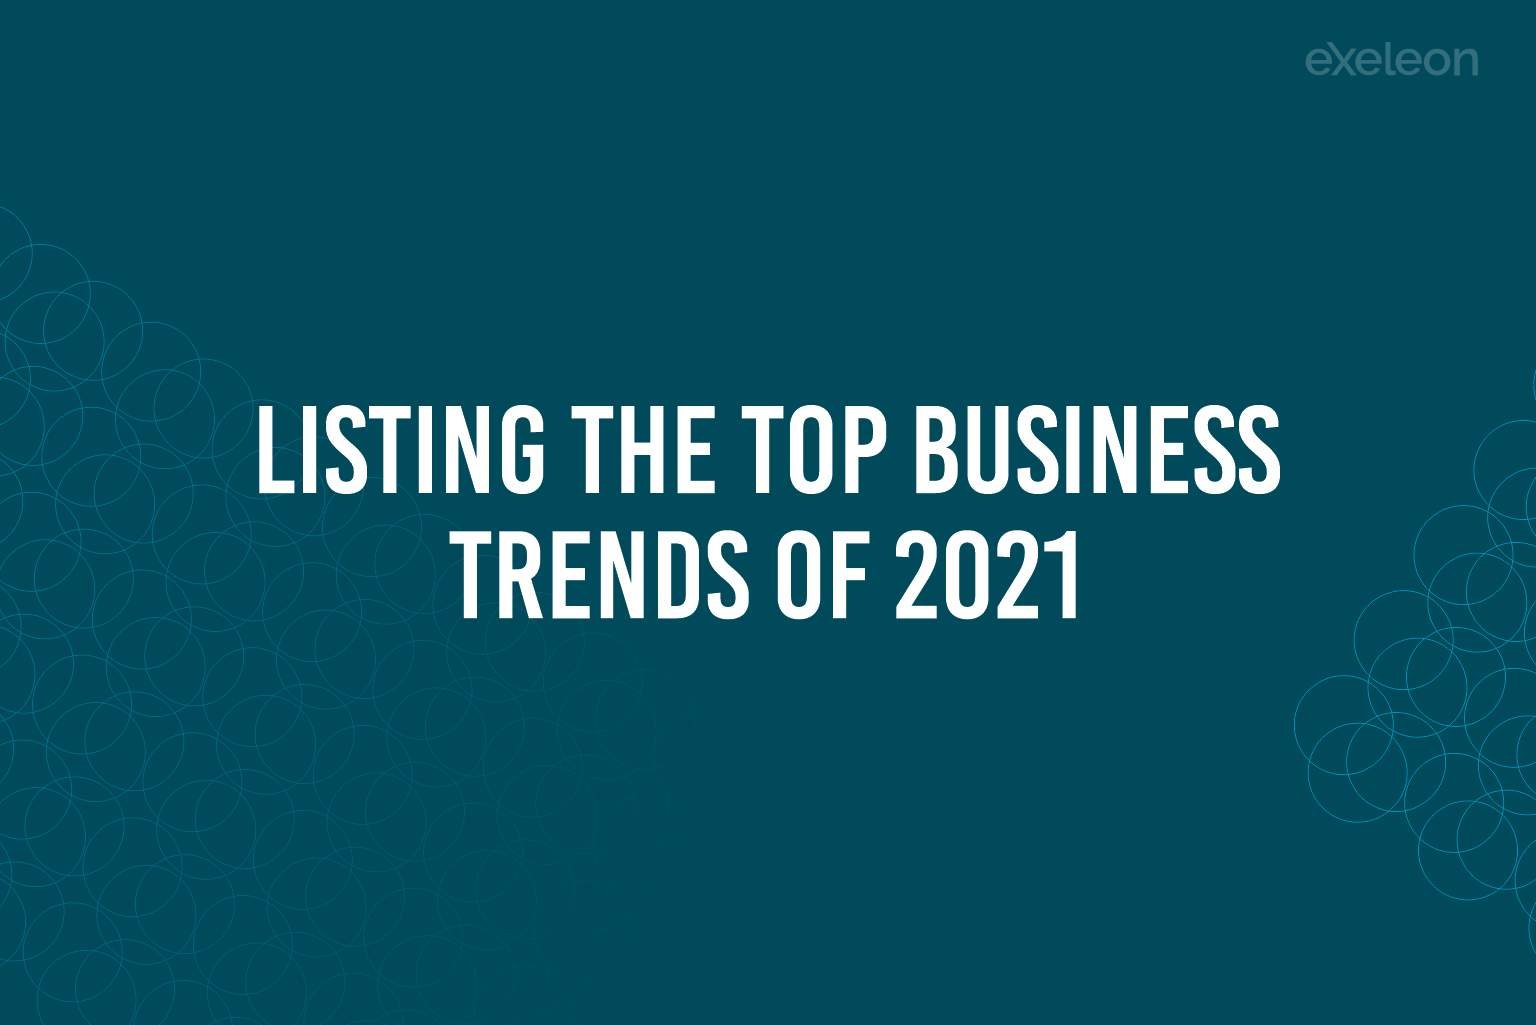 Top Business Trends of 2021